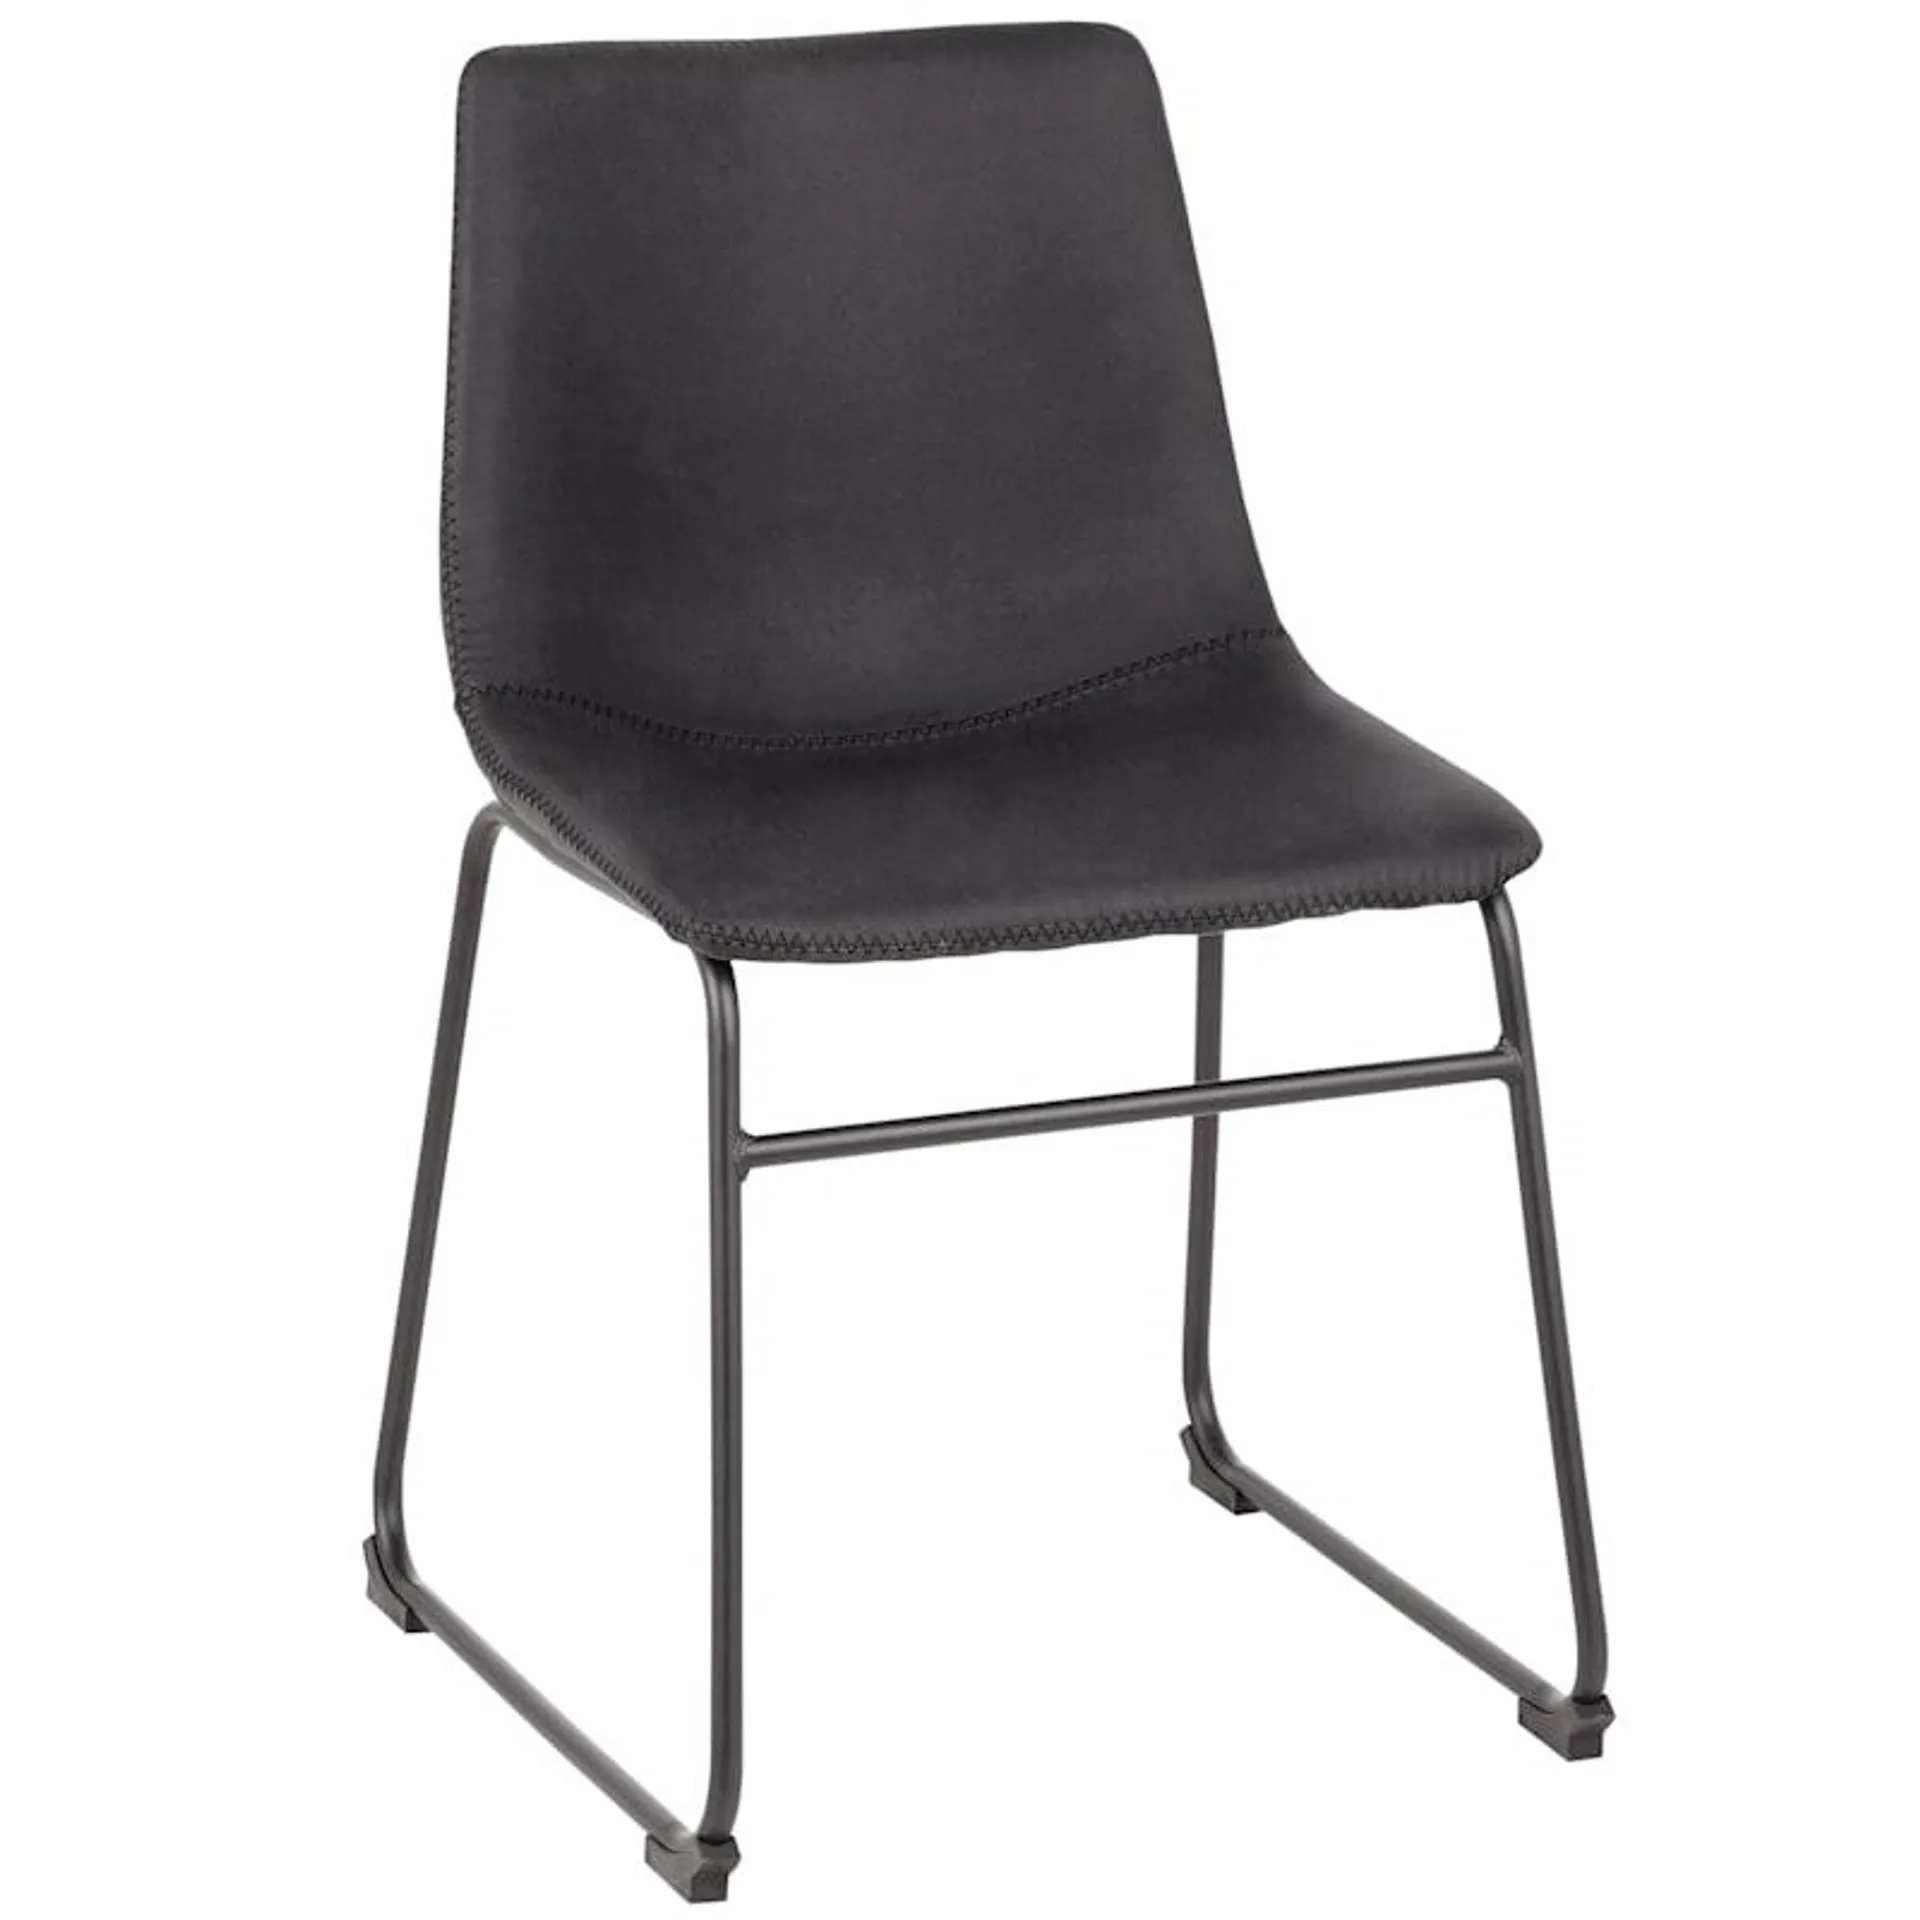 Drake Modern Industrial Faux Leather Dining Chair, Dark Grey